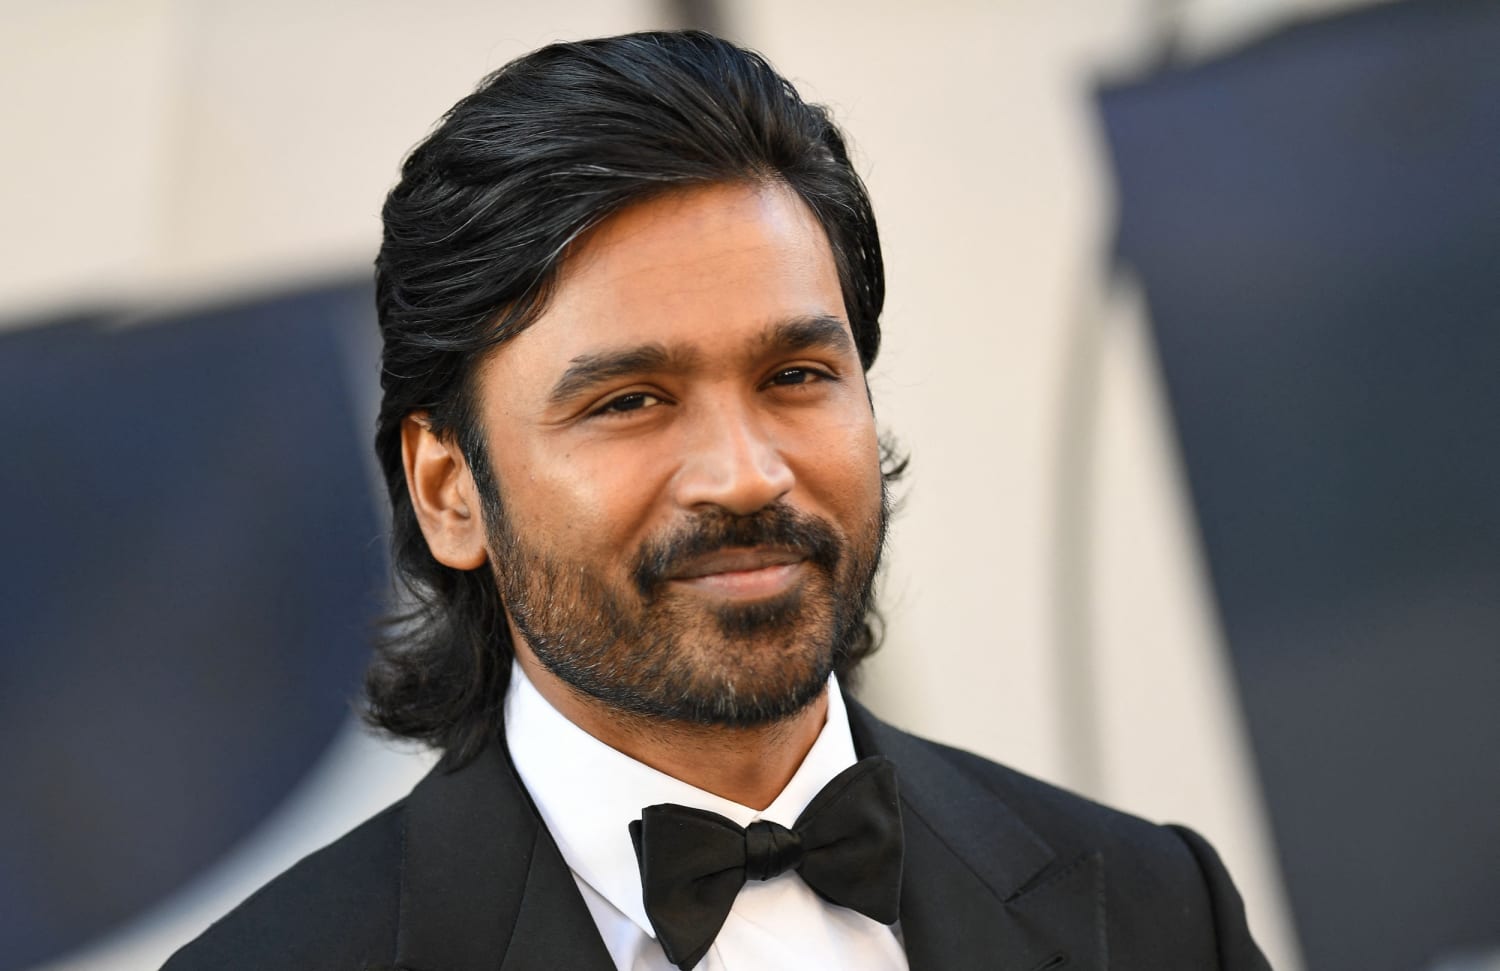 Why fans are going wild over Tamil actor Dhanush appearing in 'The Gray Man'